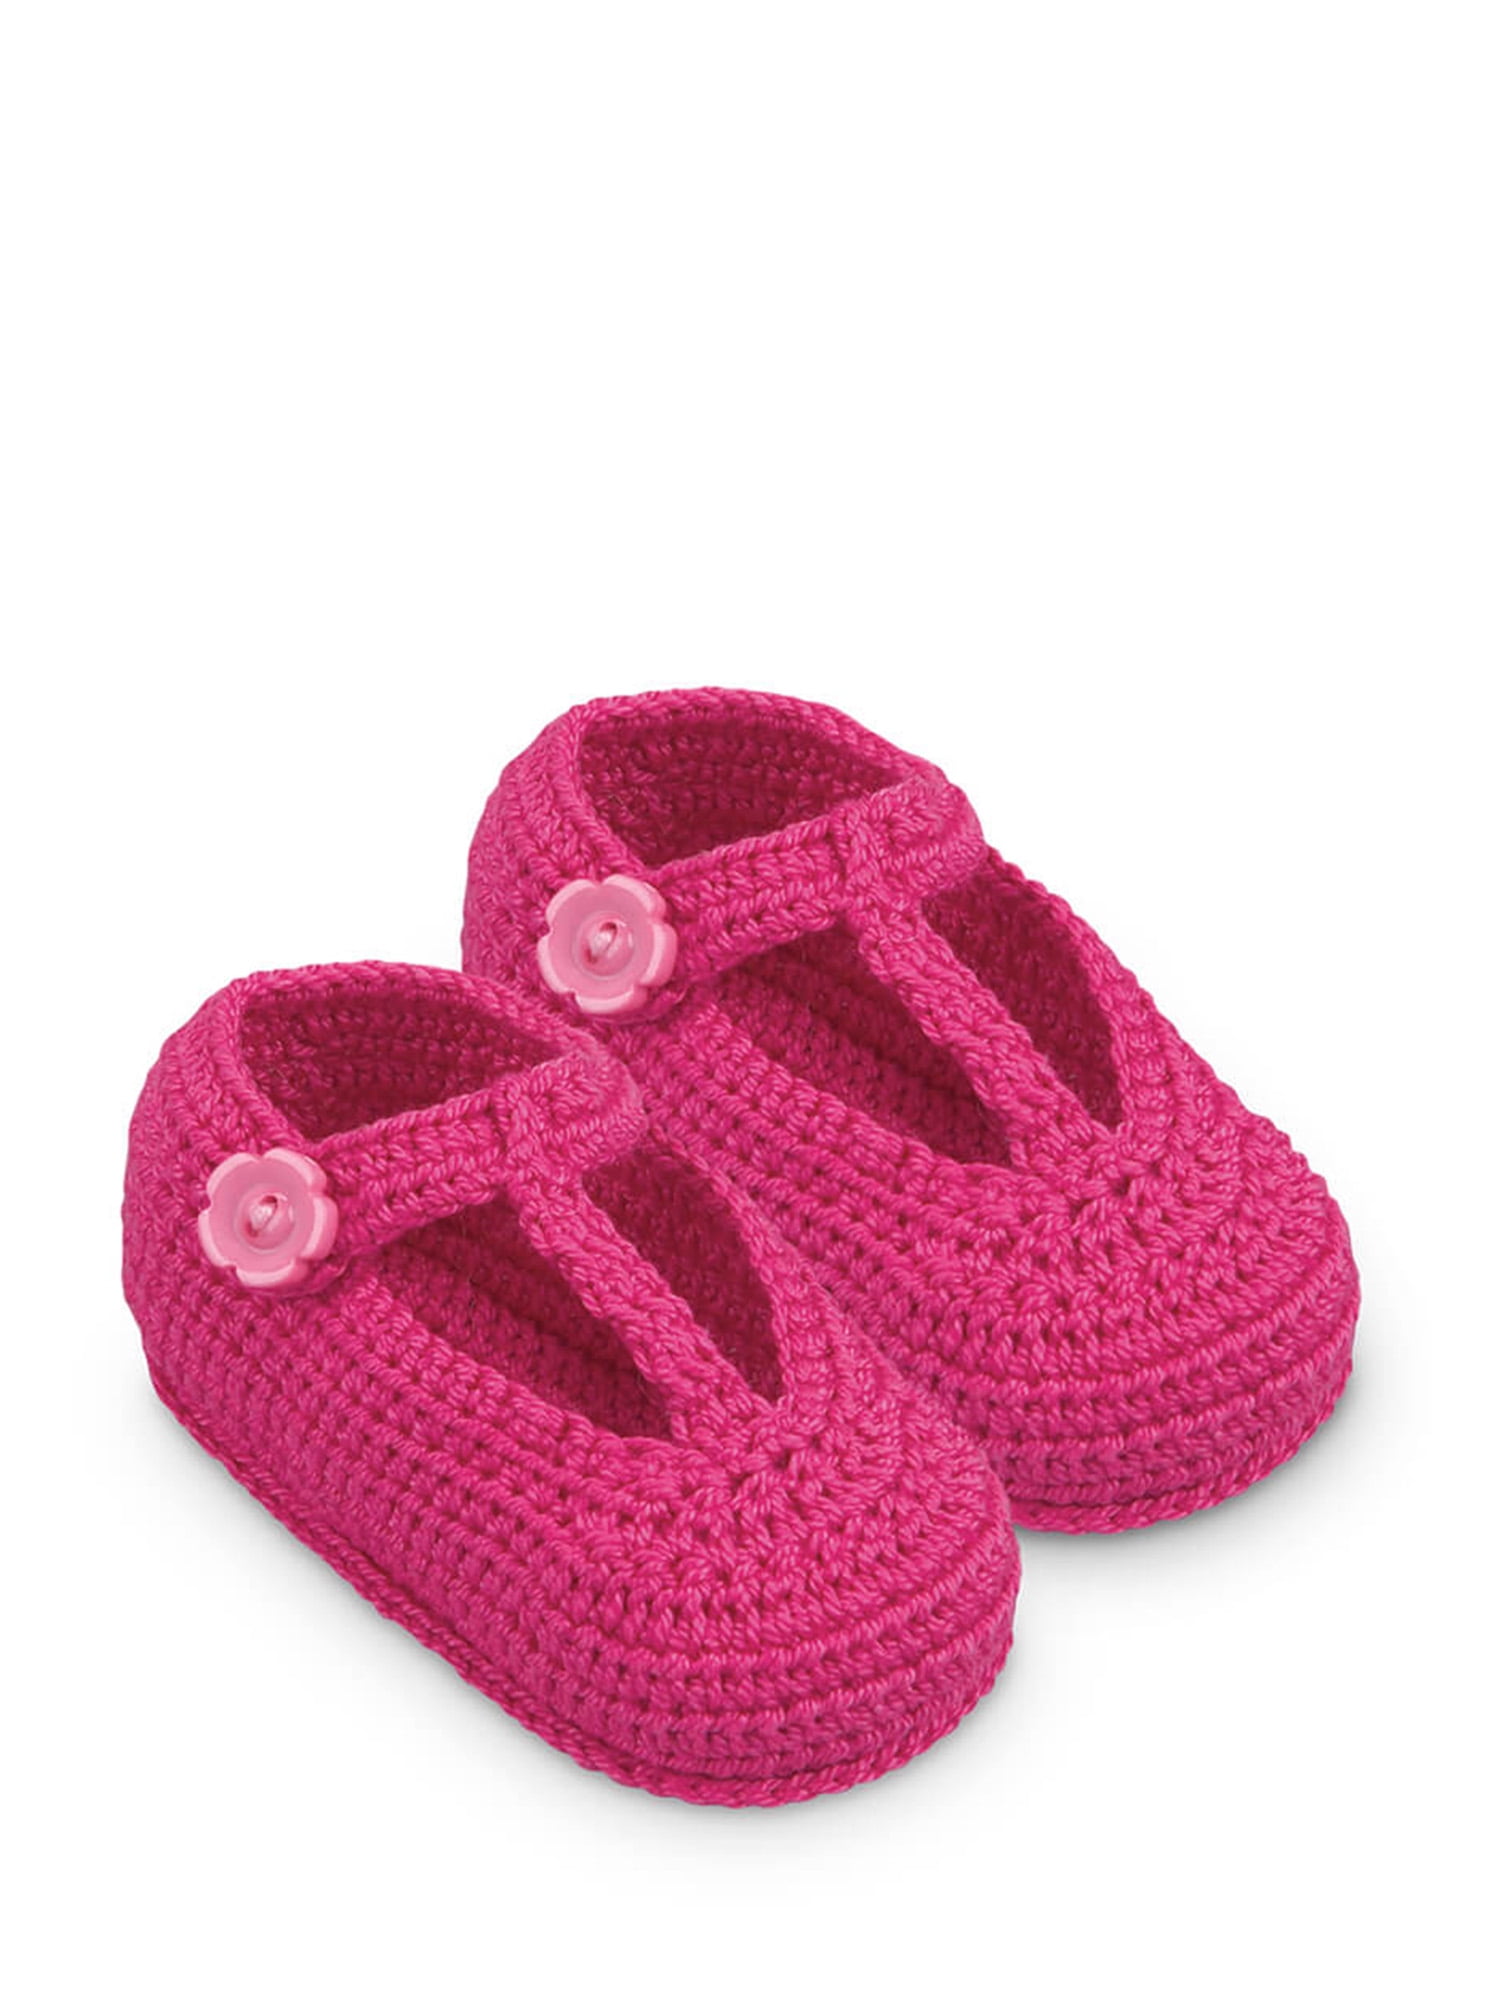 HANDMADE CROCHET BABY FIRST SHOES BOOTIES TRAINERS WOOL CASUAL SHOES SLIPPERS 